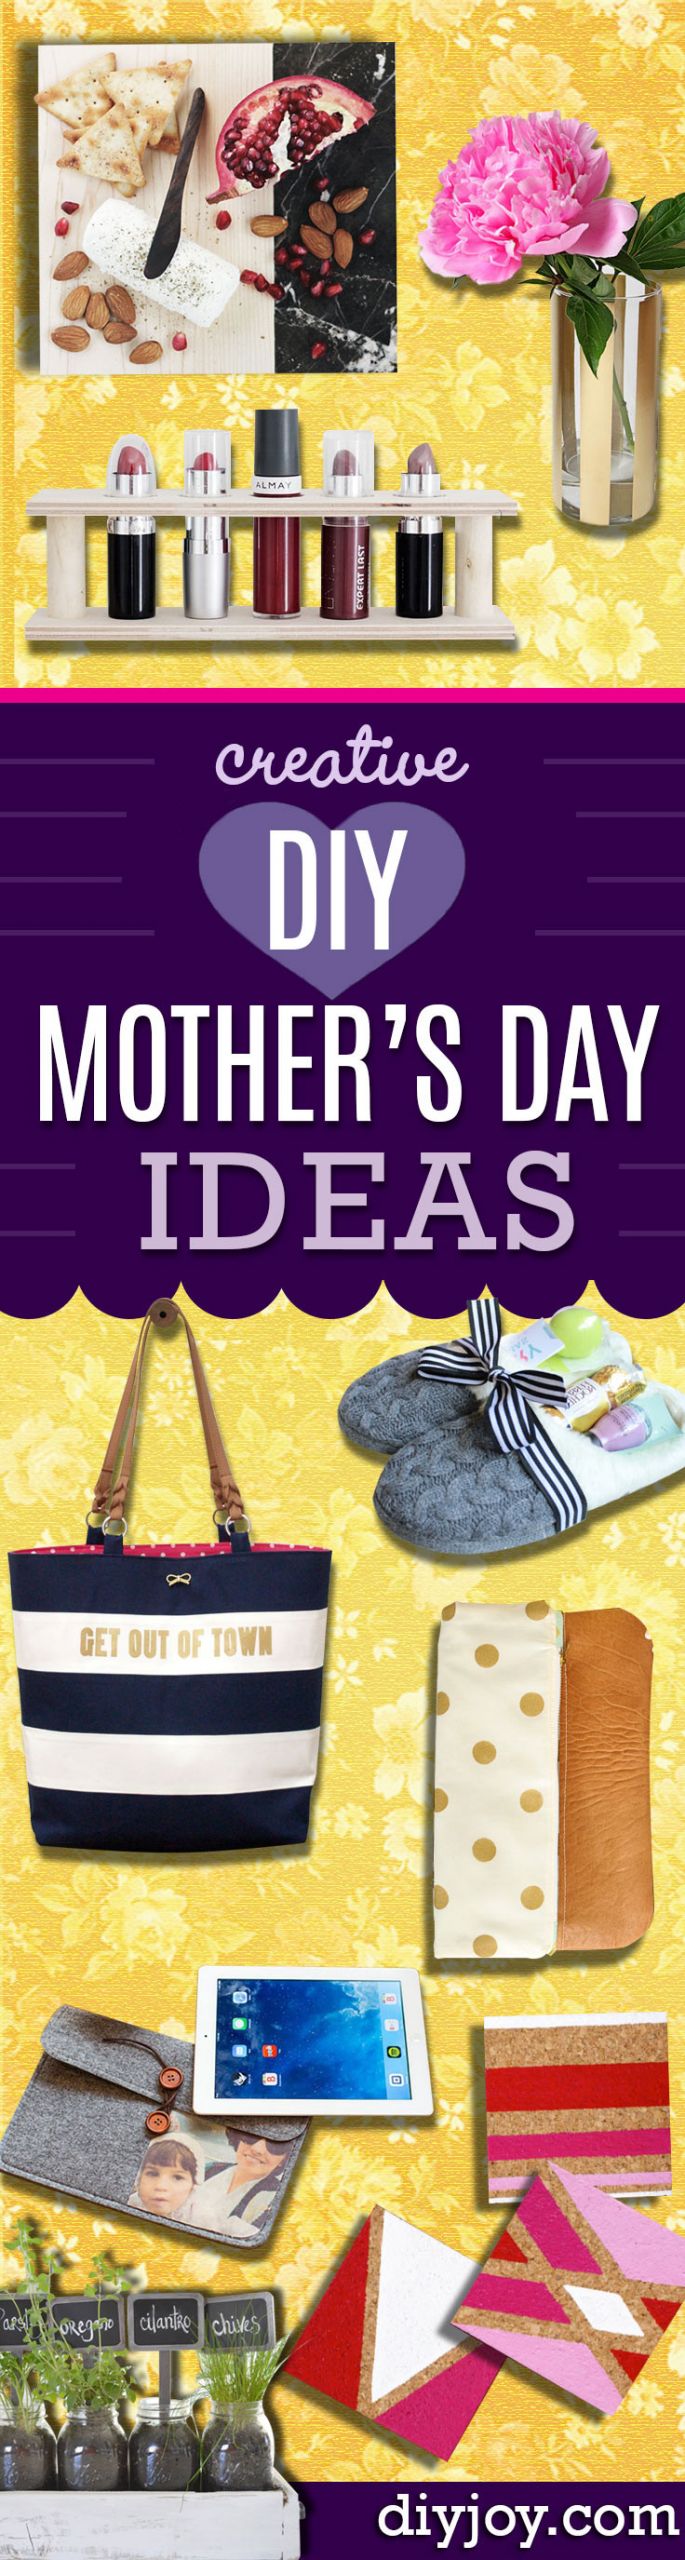 Creative Mother's Day Gifts
 35 Creatively Thoughtful DIY Mother s Day Gifts